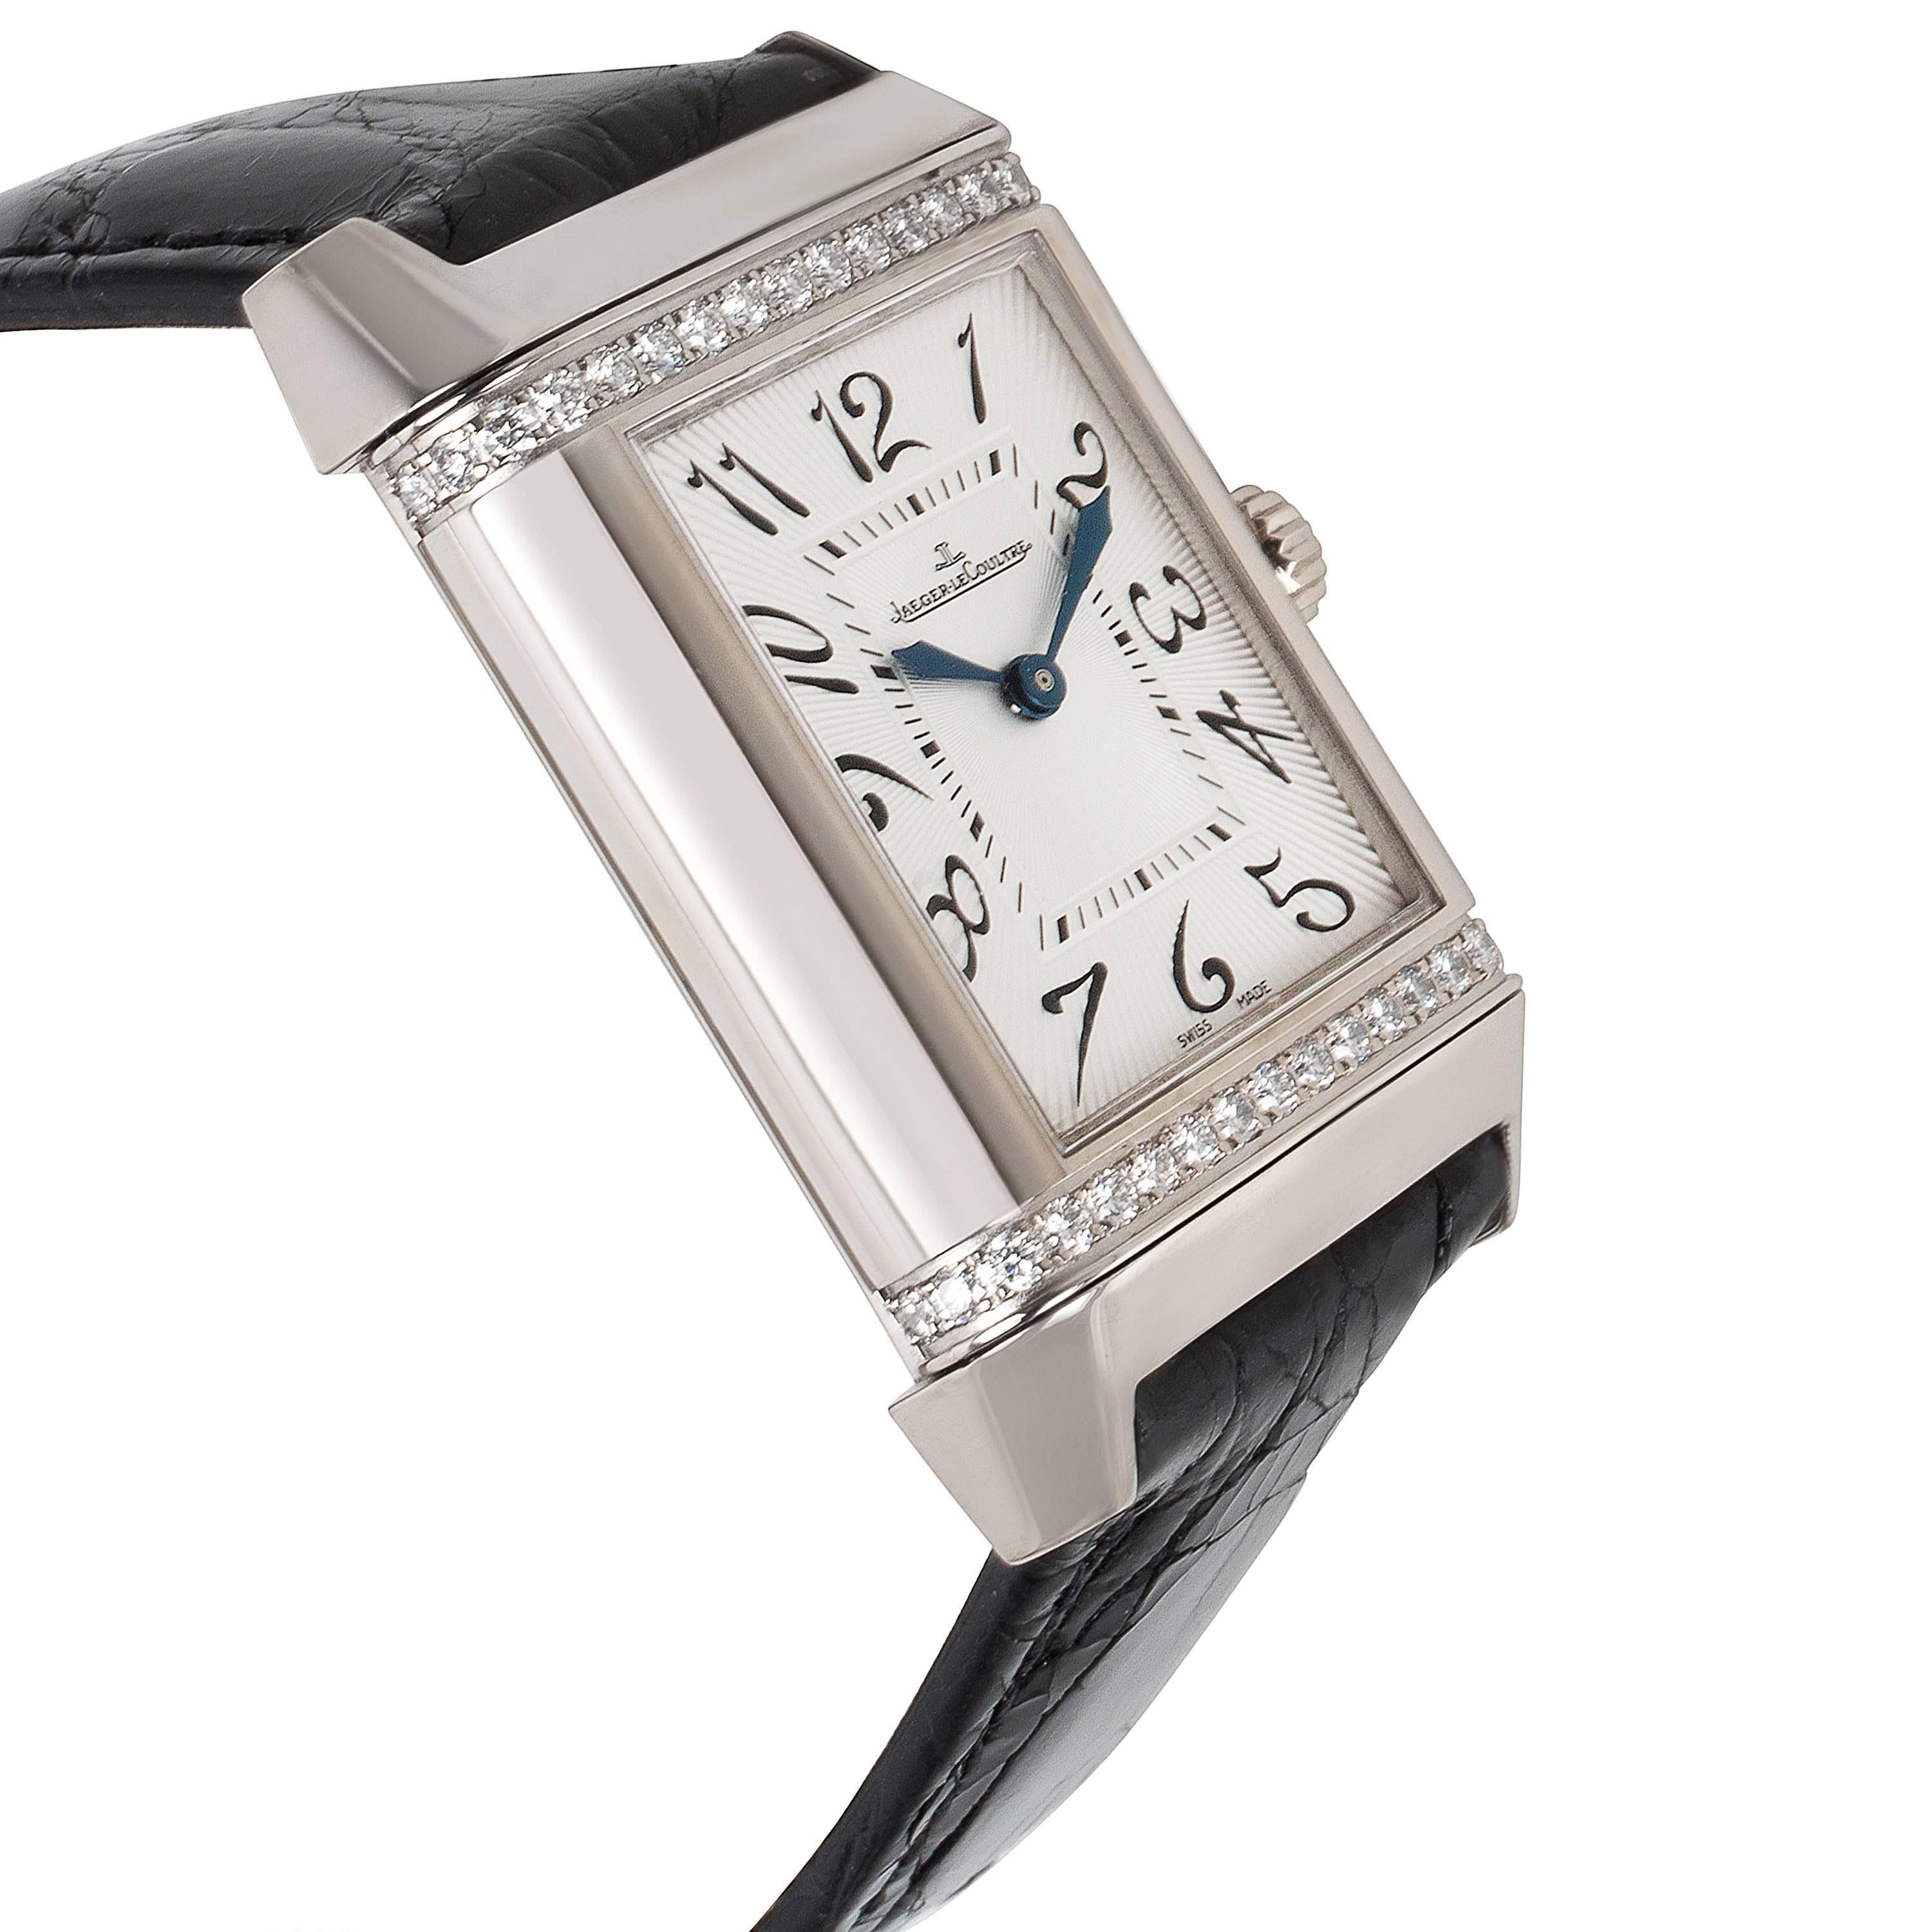 Modern Jaeger-LeCoultre White Gold Reverso Duetto Mechanical Wristwatch